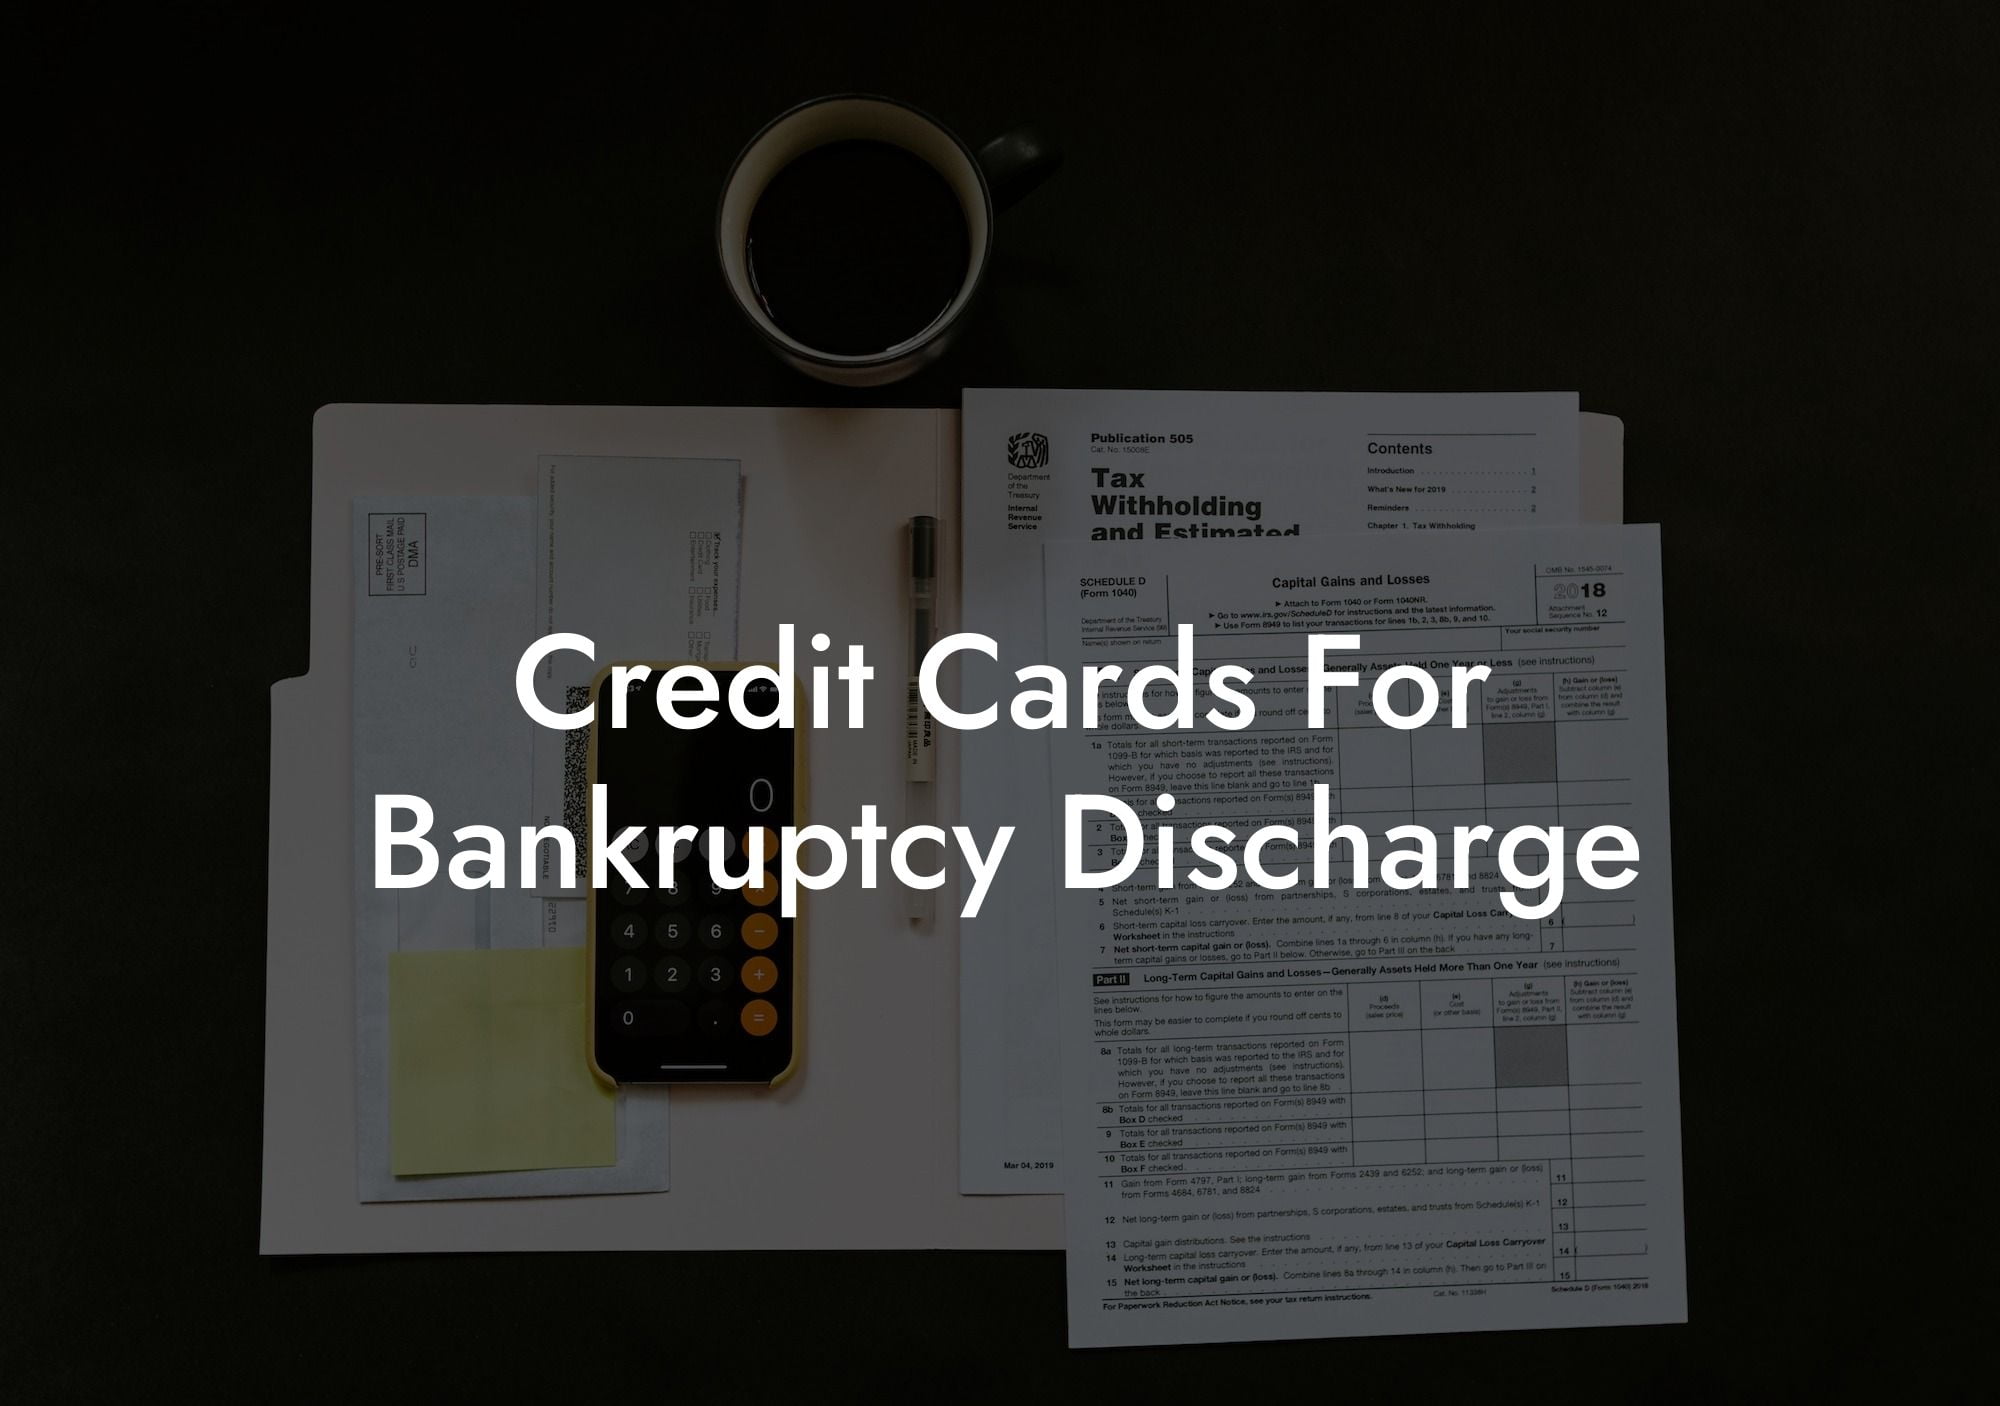 Credit Cards For Bankruptcy Discharge